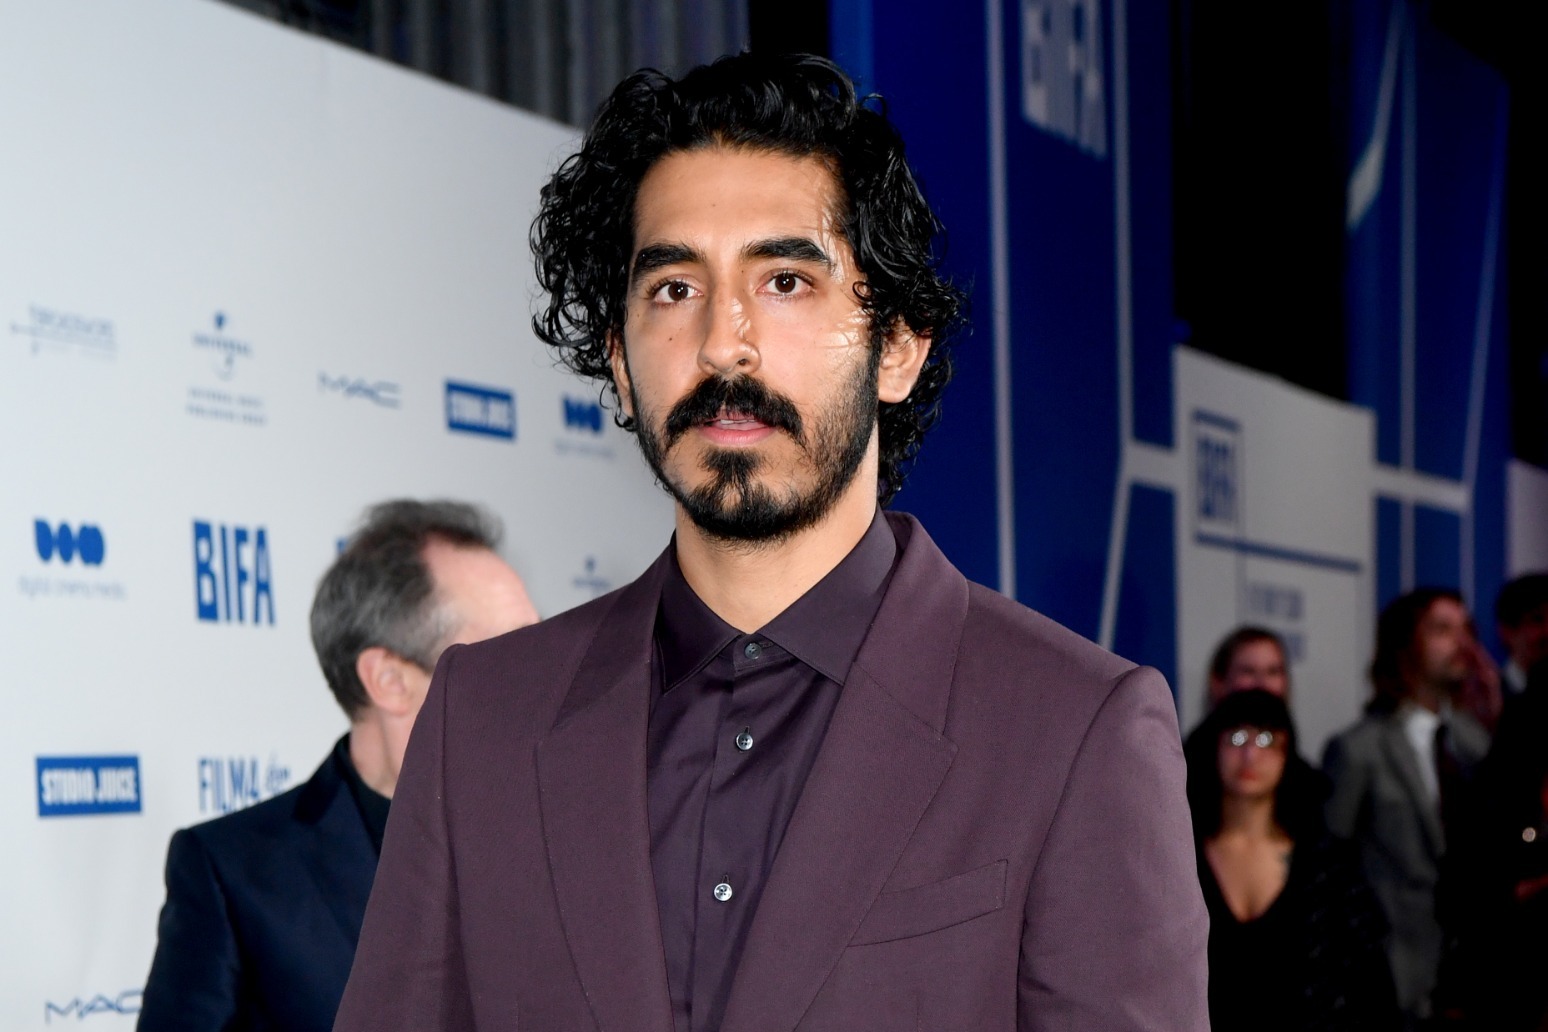 Dev Patel says he has been in ‘cultural no-man’s land’ as an actor. 